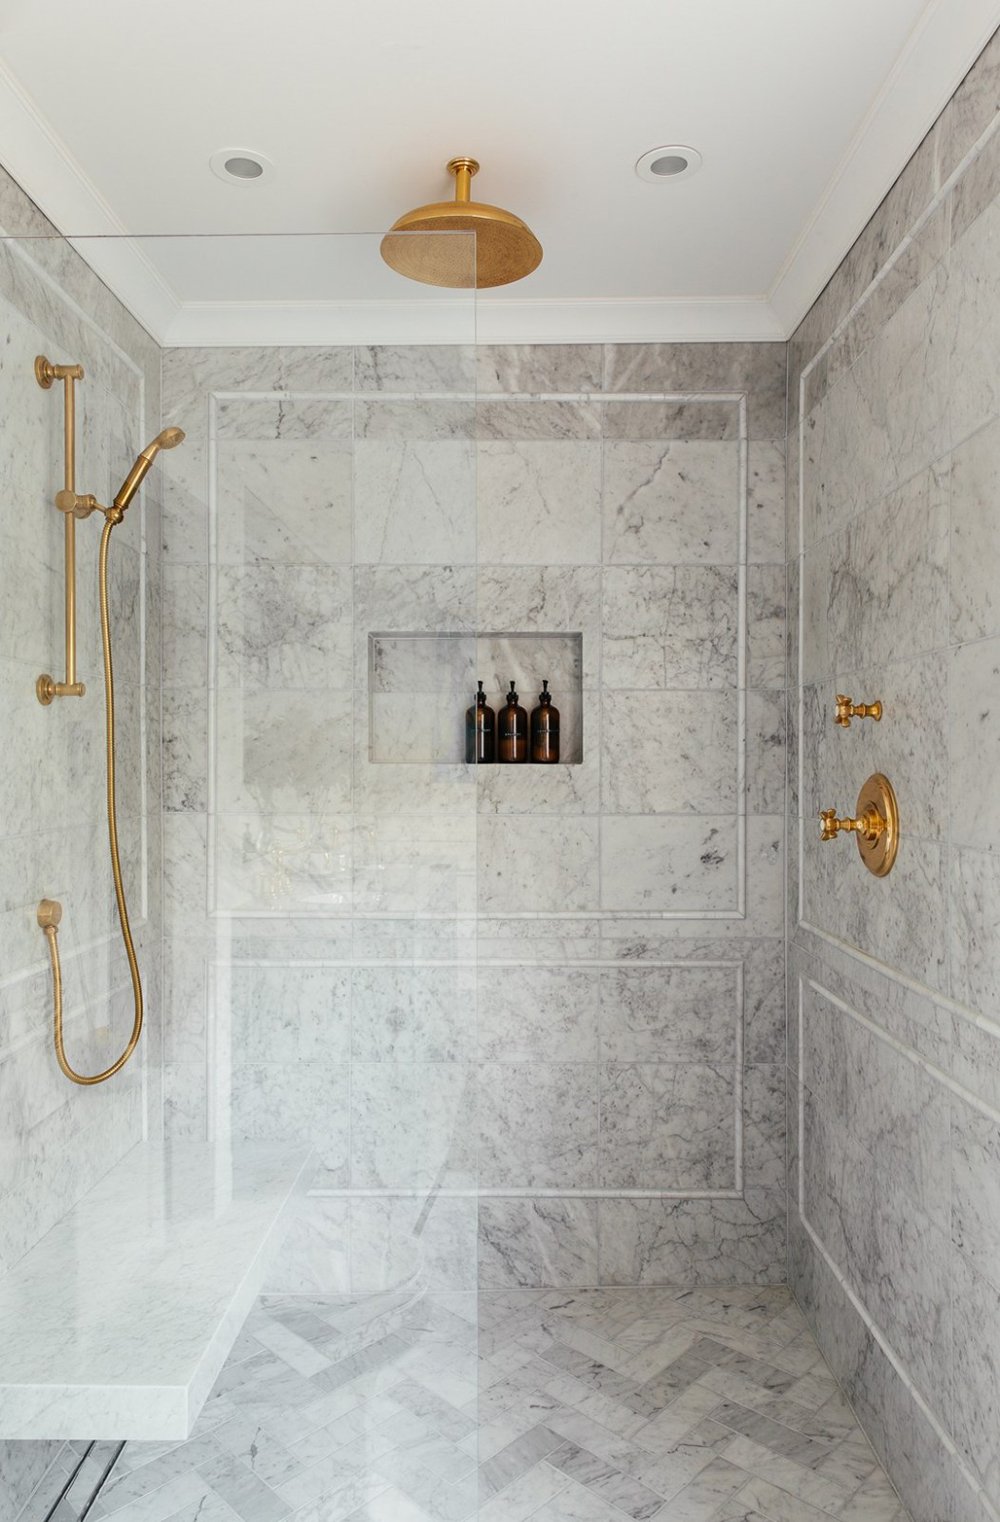 How to Plan and Design a Shower Niche - roomfortuesday.com